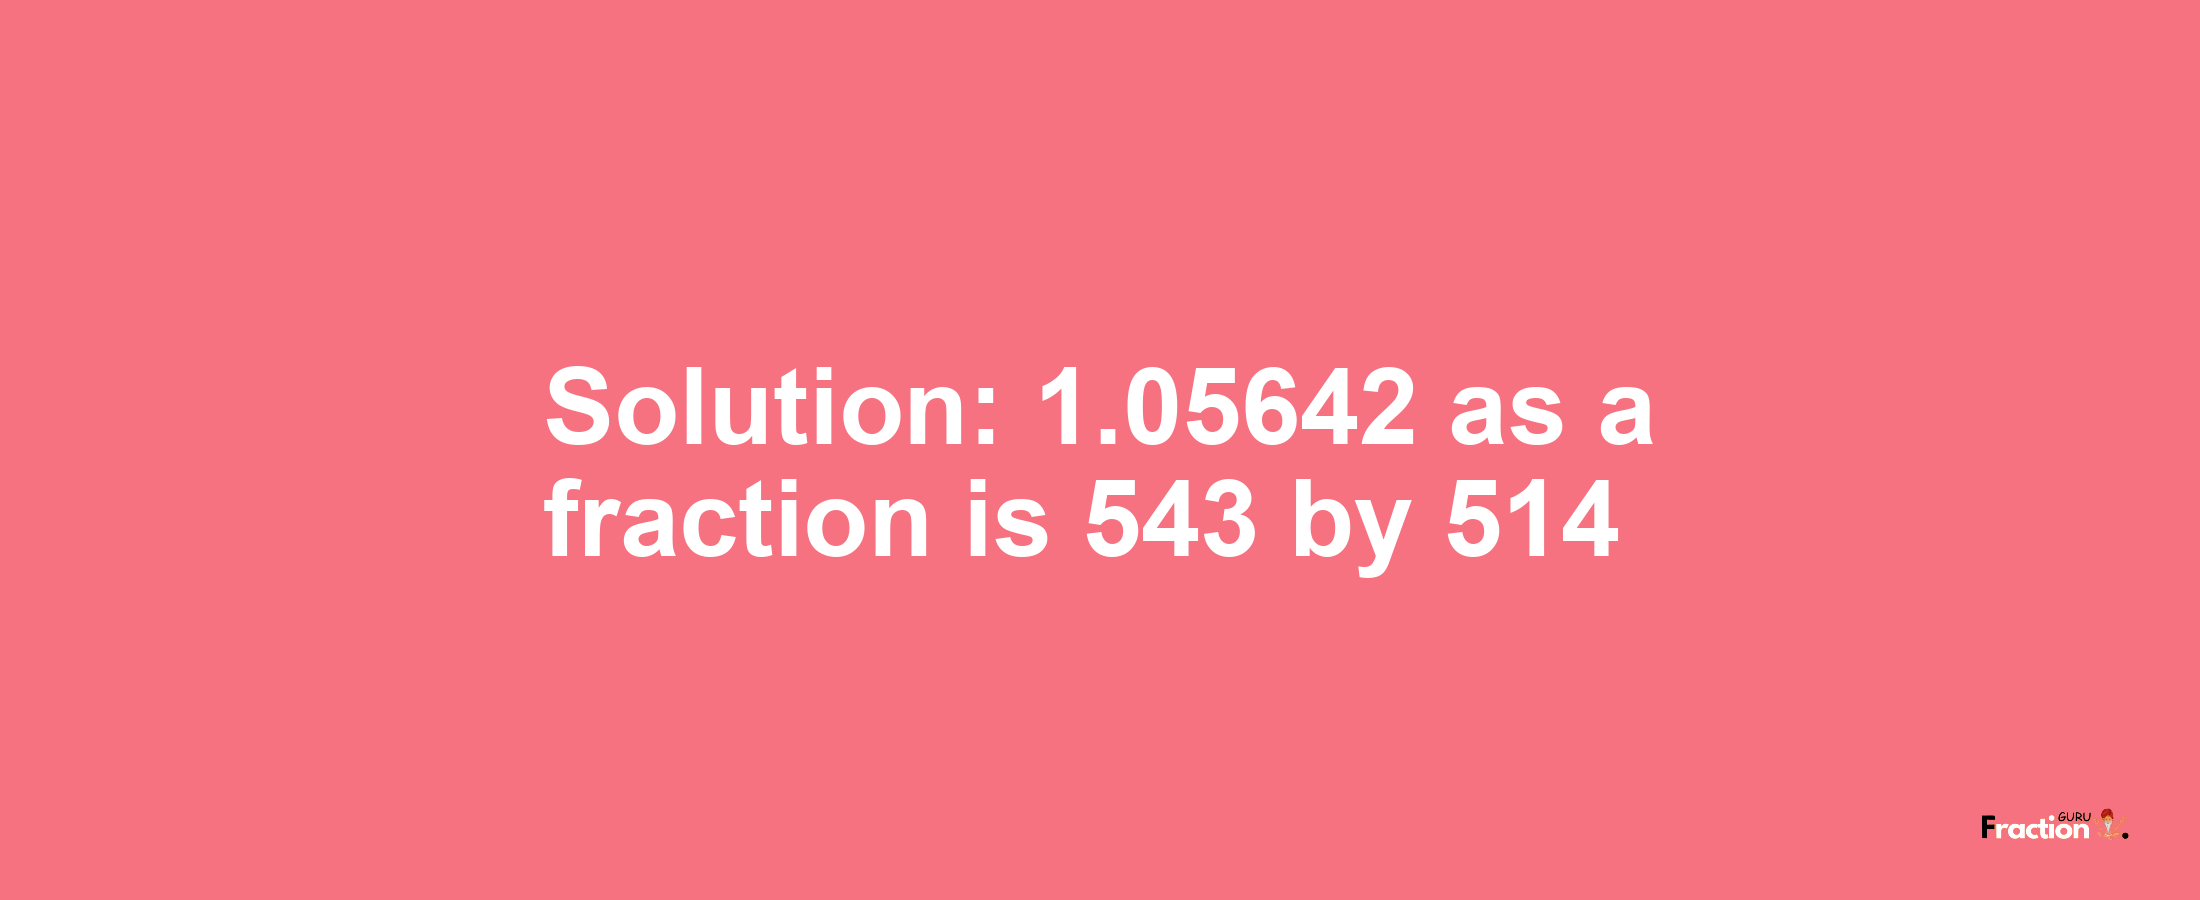 Solution:1.05642 as a fraction is 543/514